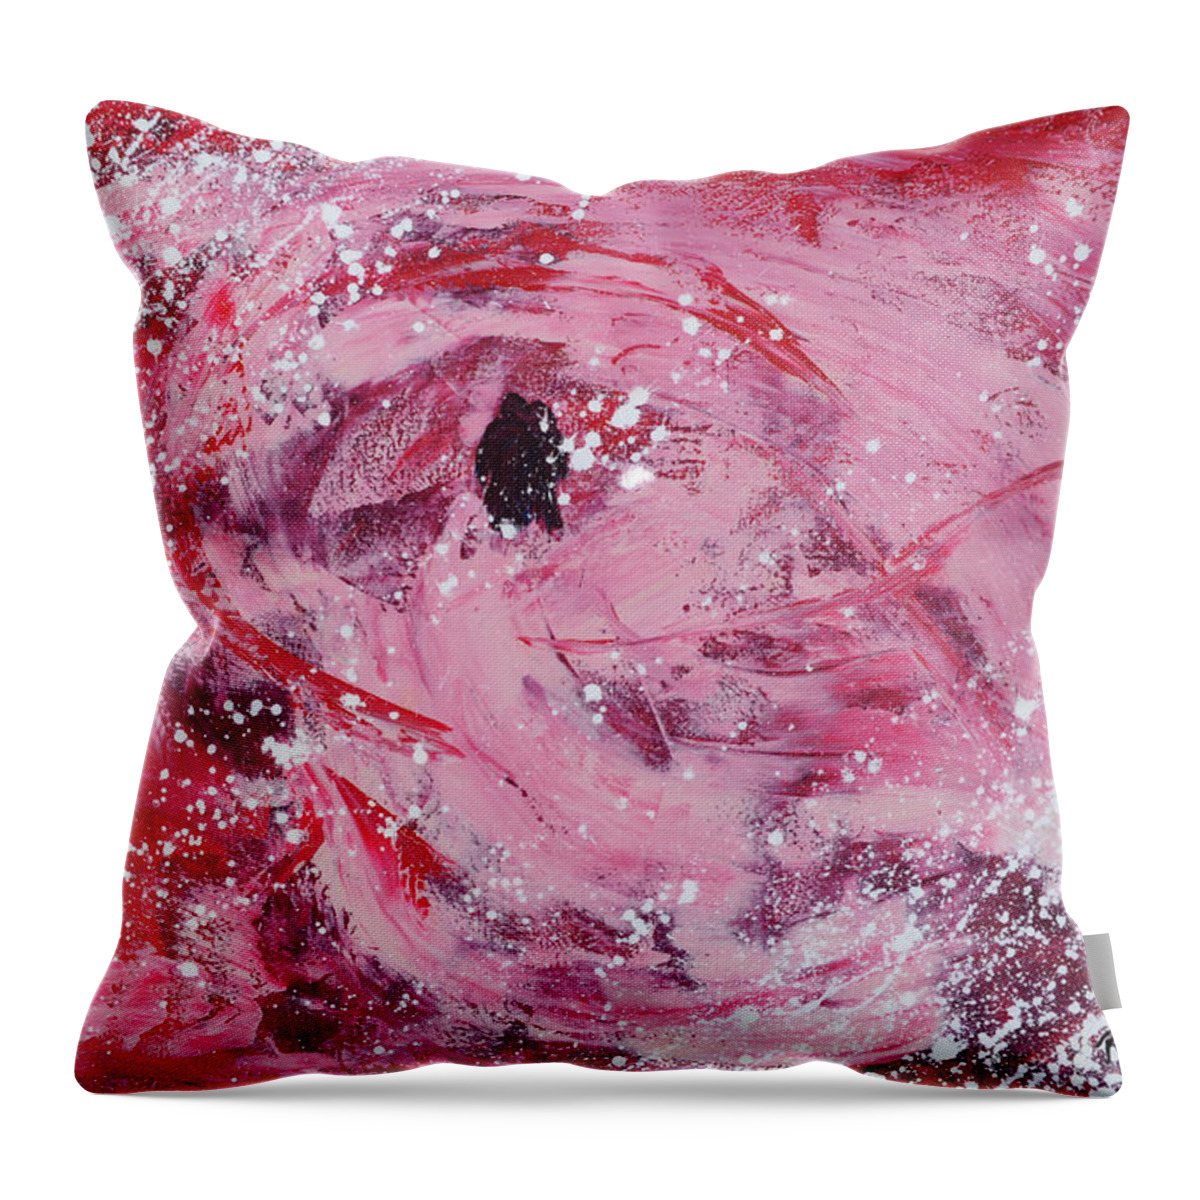 Te Quiero Mucho Throw Pillow featuring the painting Te Quiero Mucho by Stephane Trahan